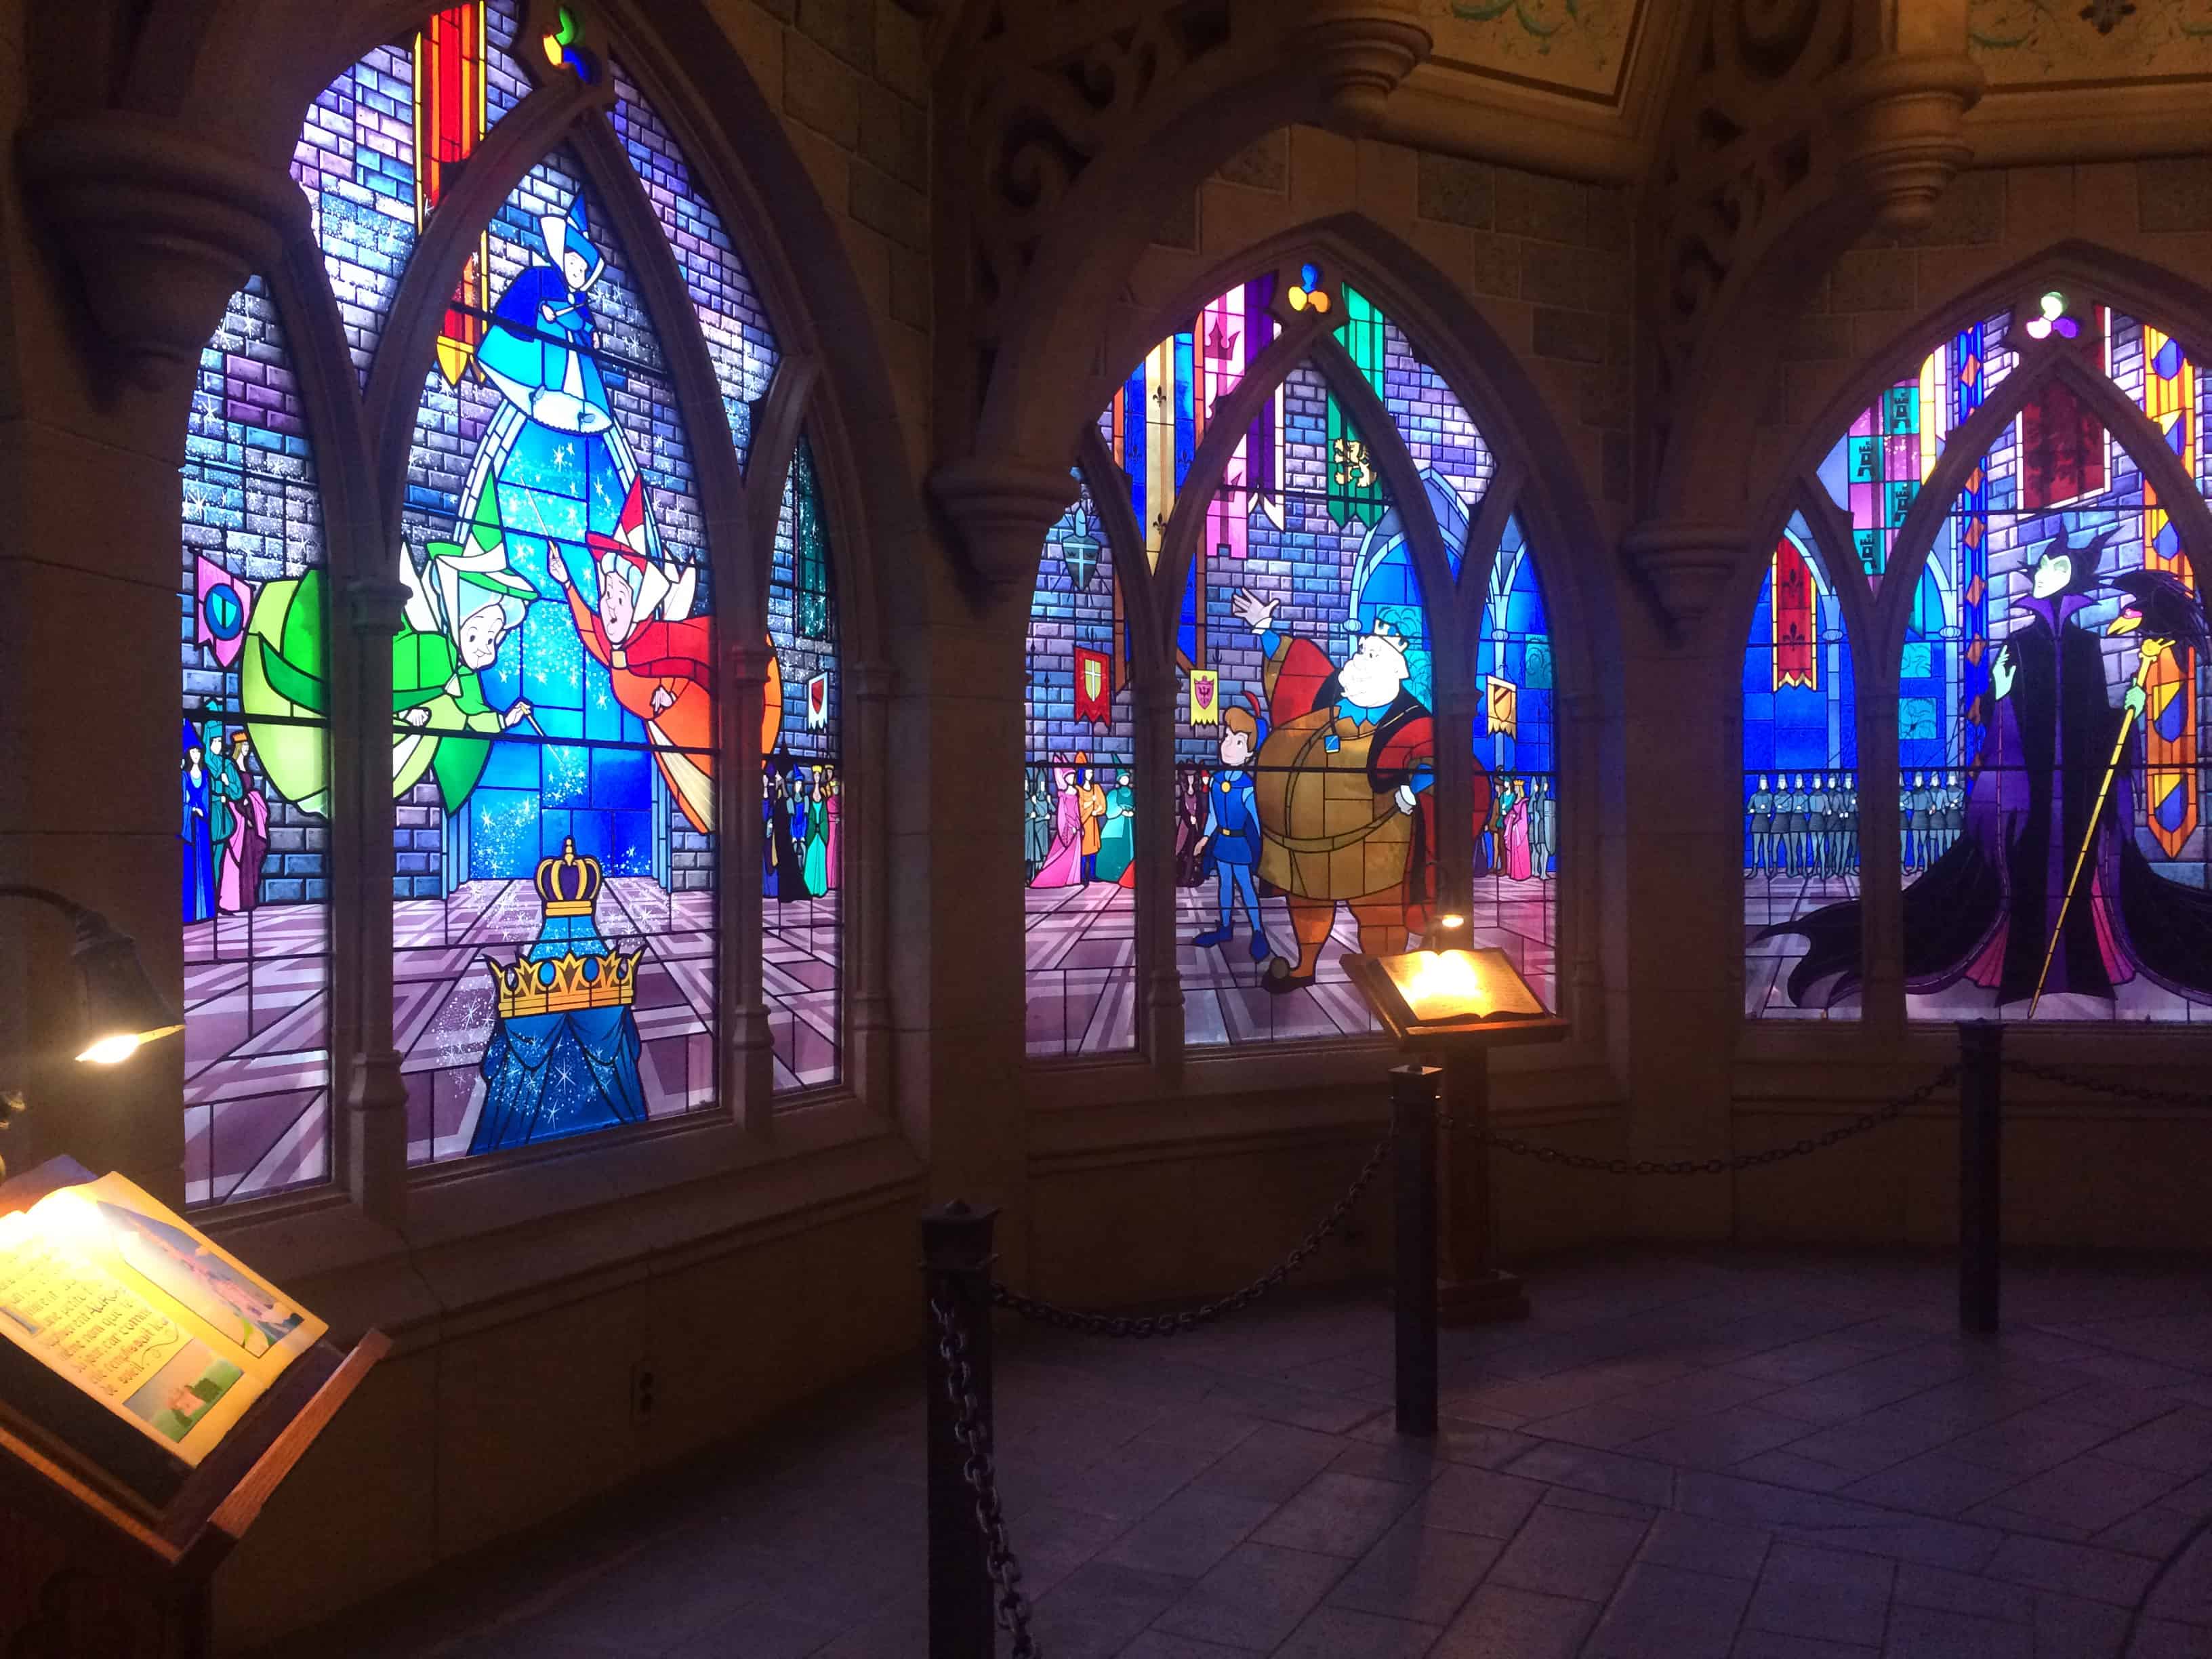 A stained glass window inside The Sleeping Beauty Castle at